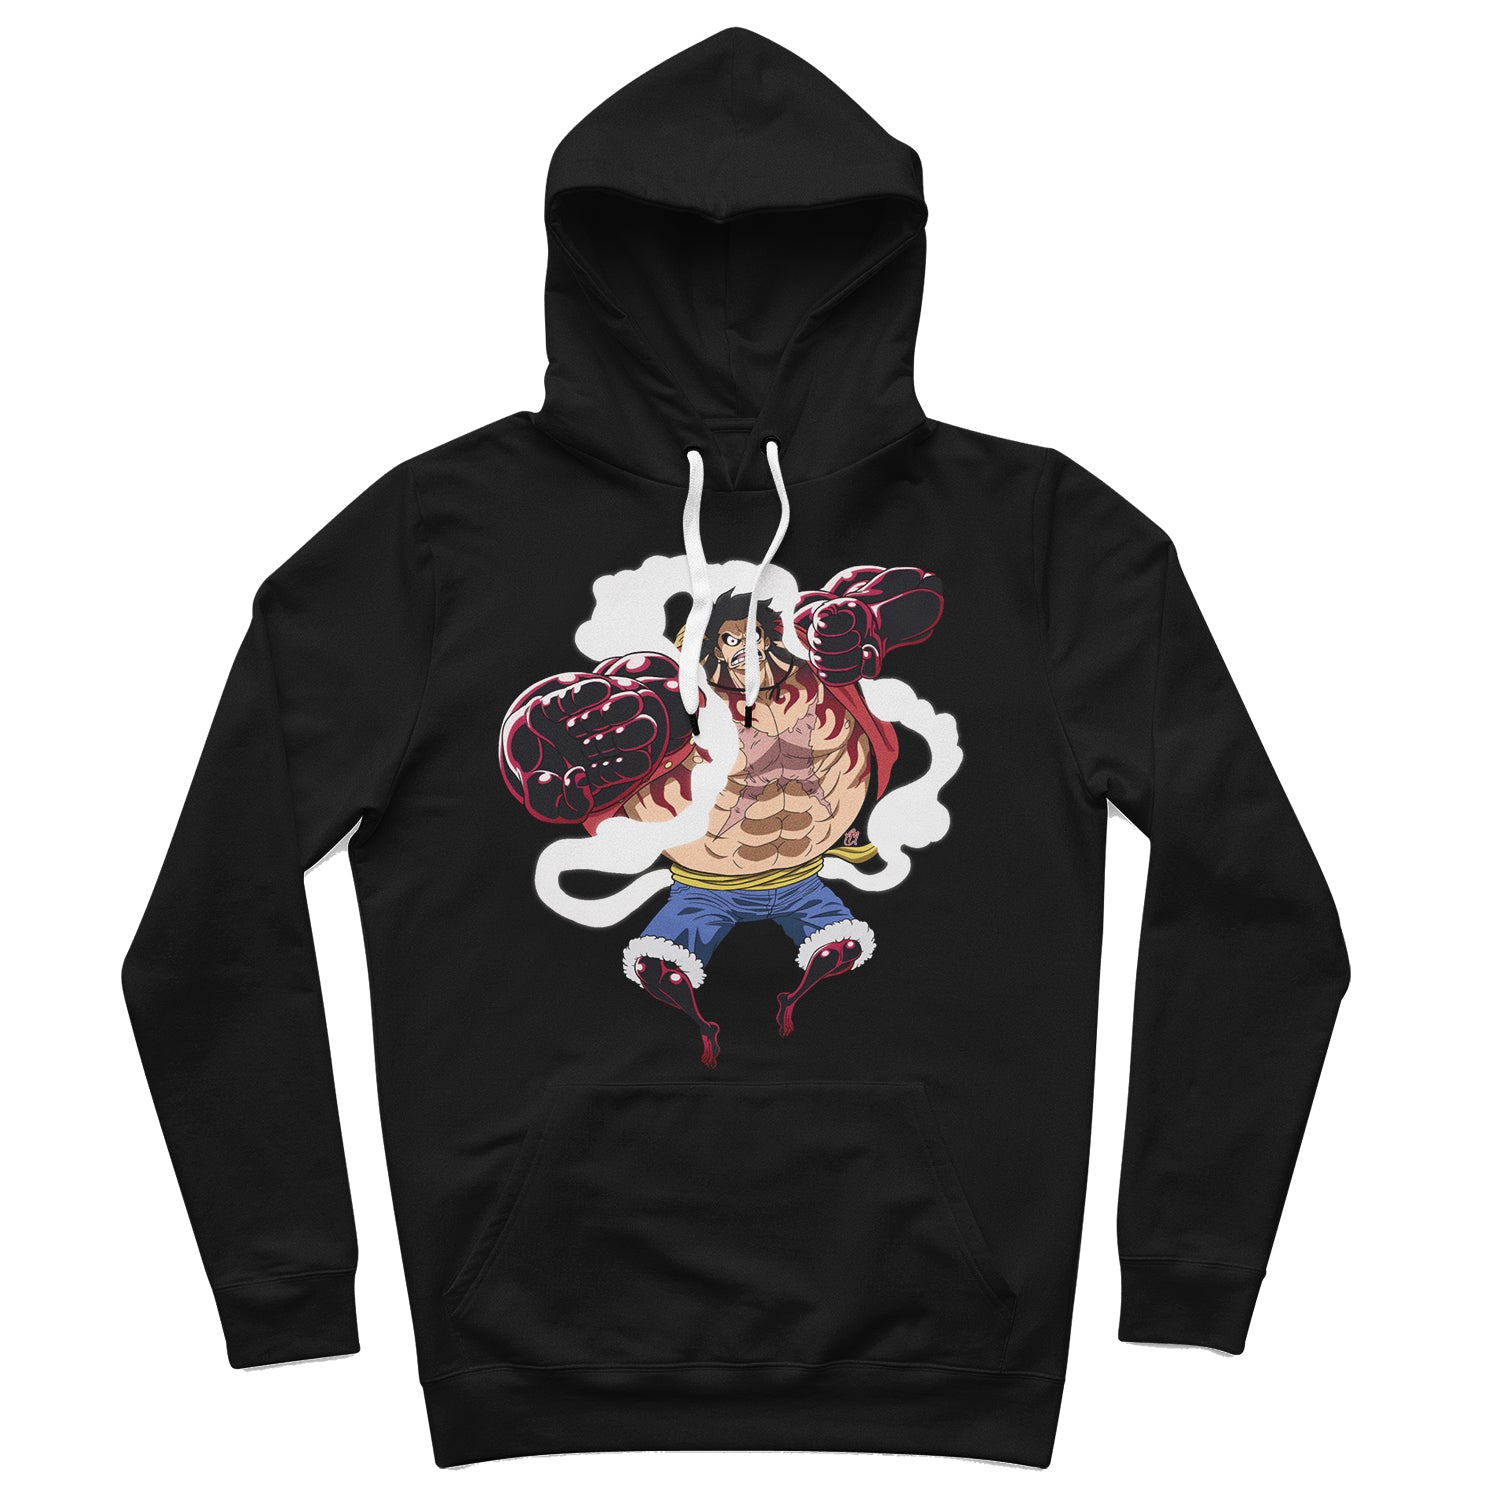 1 One Piece Limited Edition Hoodies Tees Unicus Original